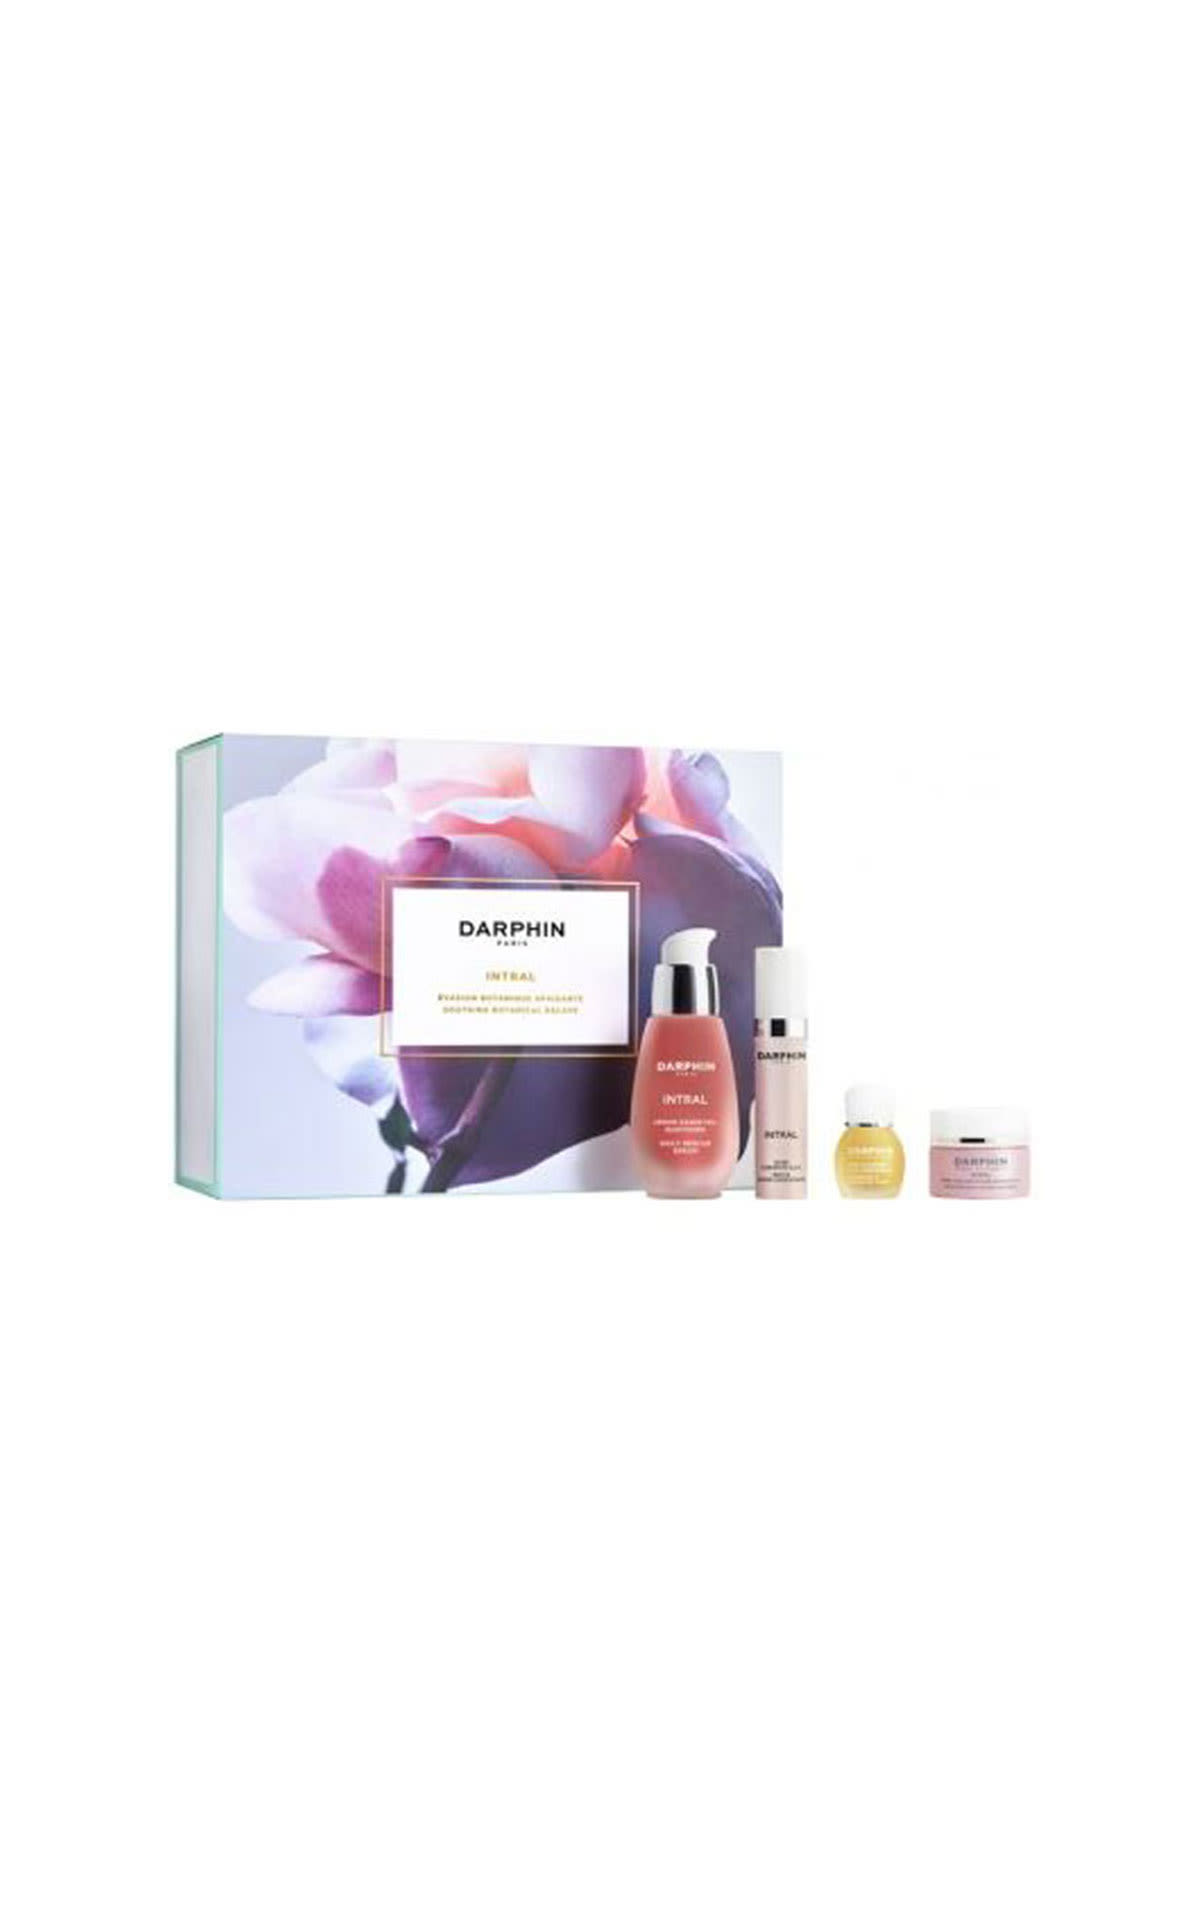 The Cosmetics Company Store Darphin intral soothing botanicals escape set from Bicester Village